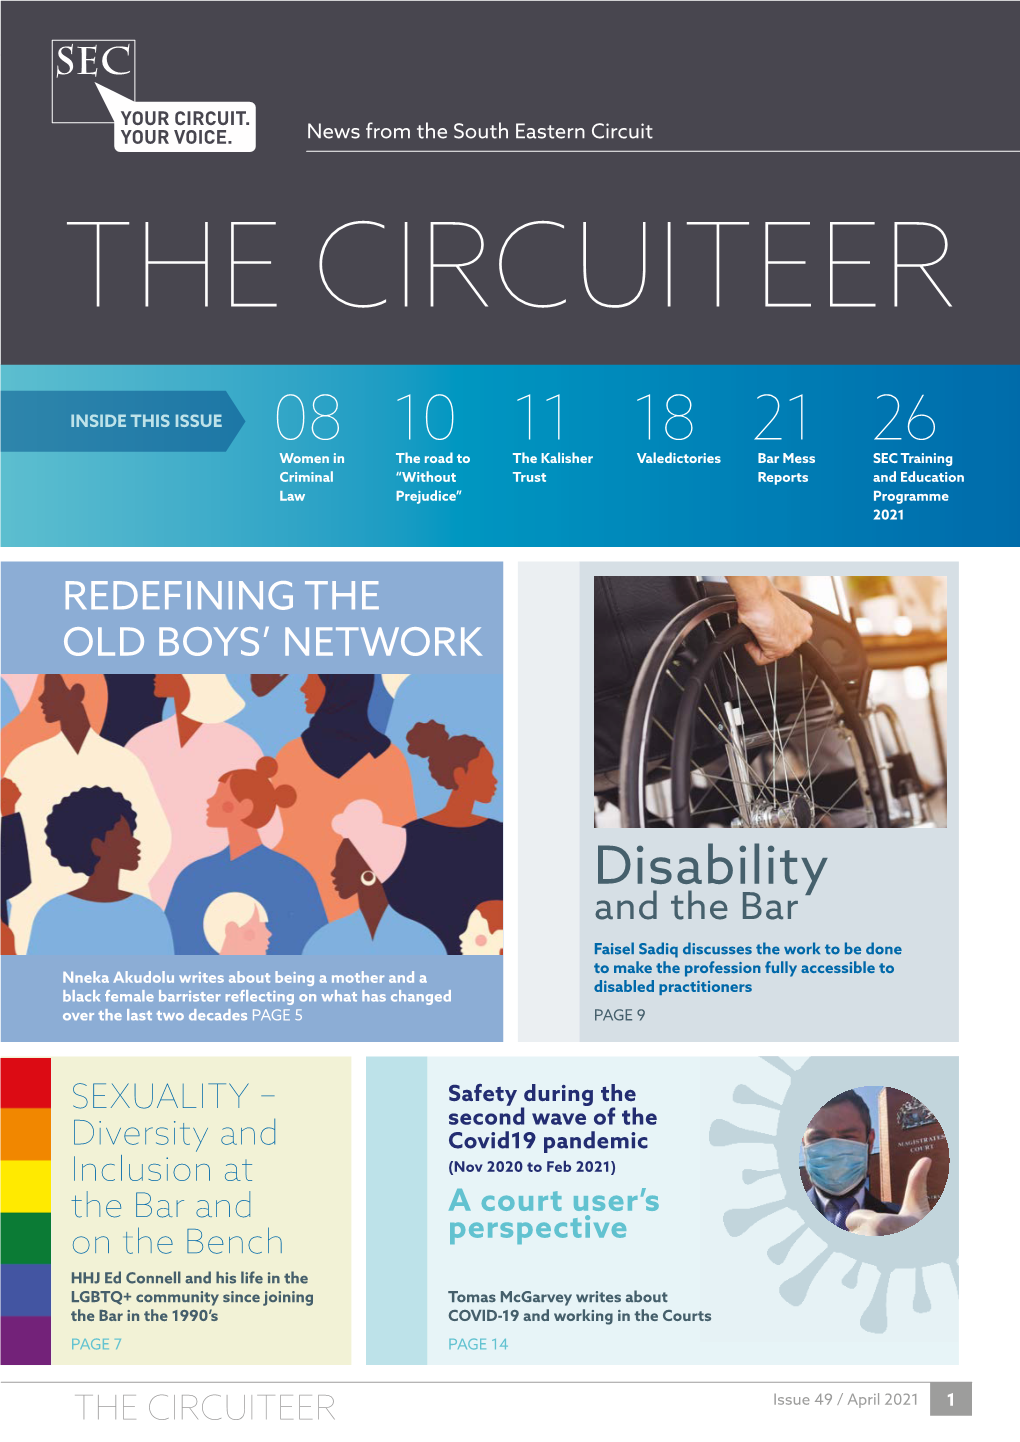 THE CIRCUITEER Issue 49 / April 2021 1 News from the South Eastern Circuit EDITOR’S COLUMN Leon Kazakos QC